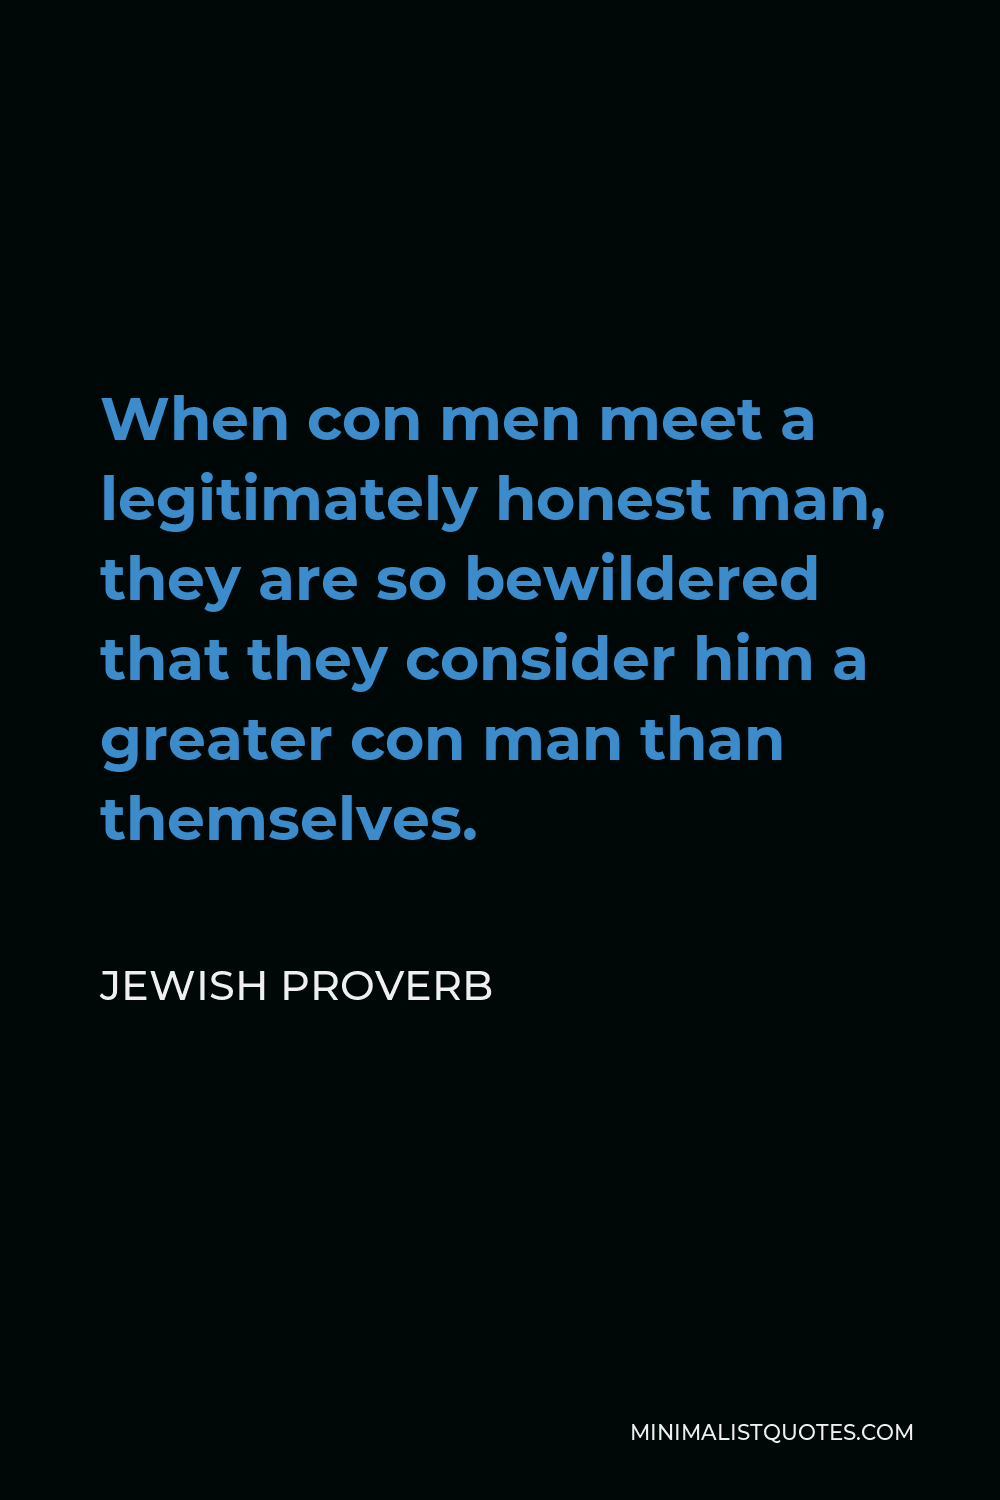 Jewish Proverb Quote - When con men meet a legitimately honest man, they are so bewildered that they consider him a greater con man than themselves.